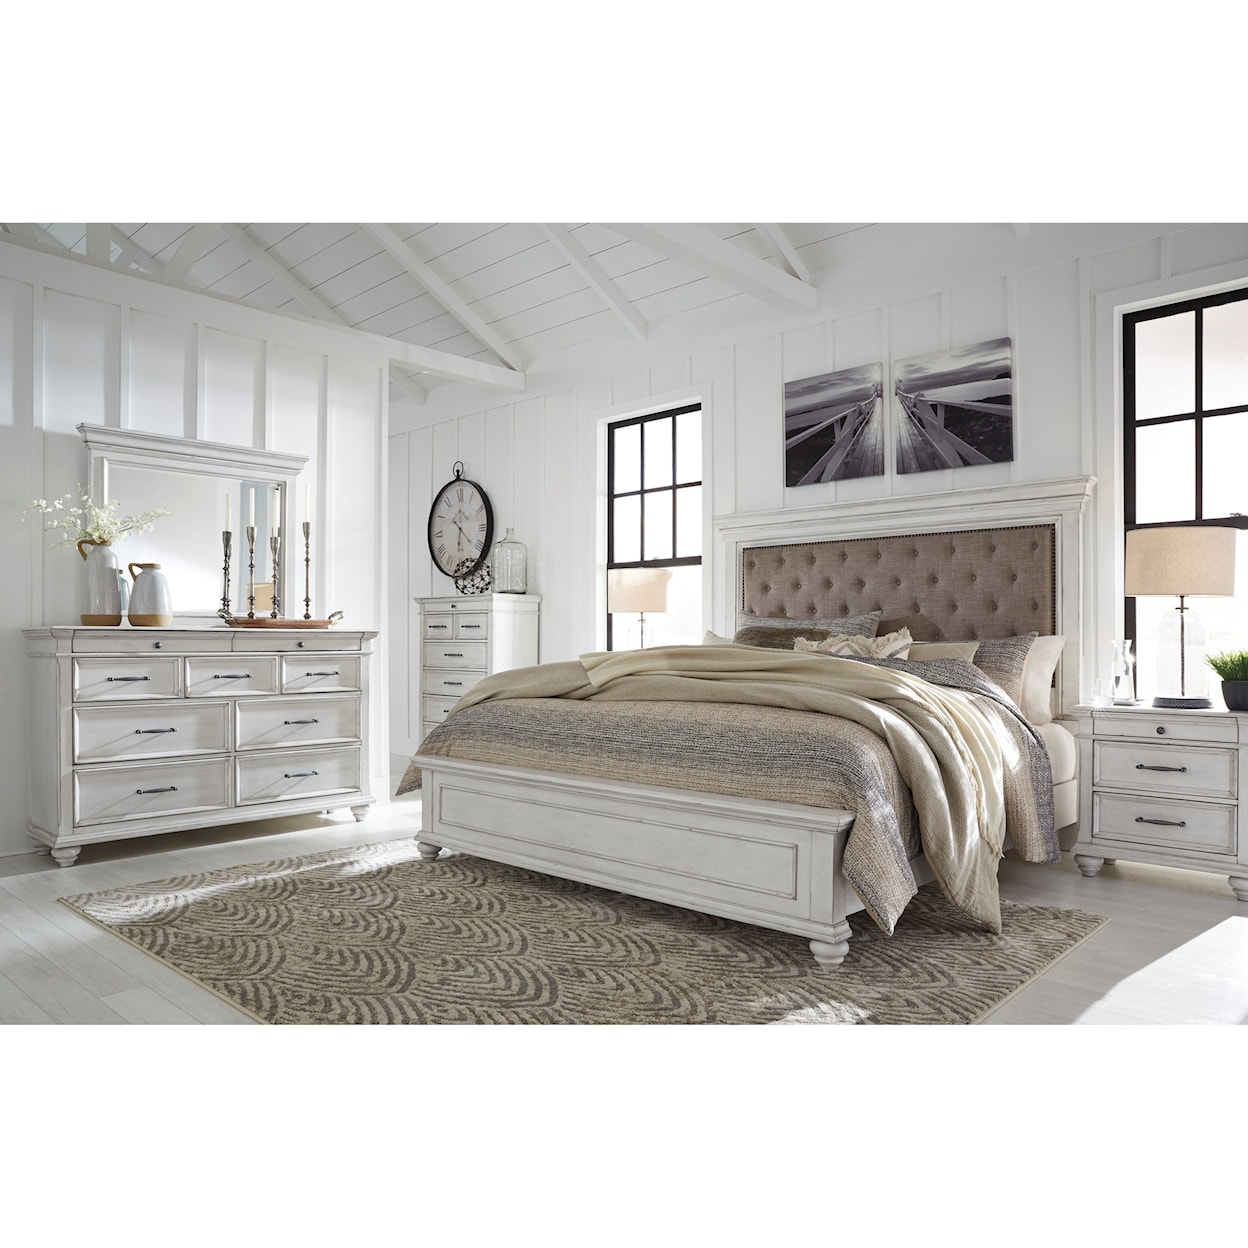 Ashley Kanwyn Queen Upholstered Bed